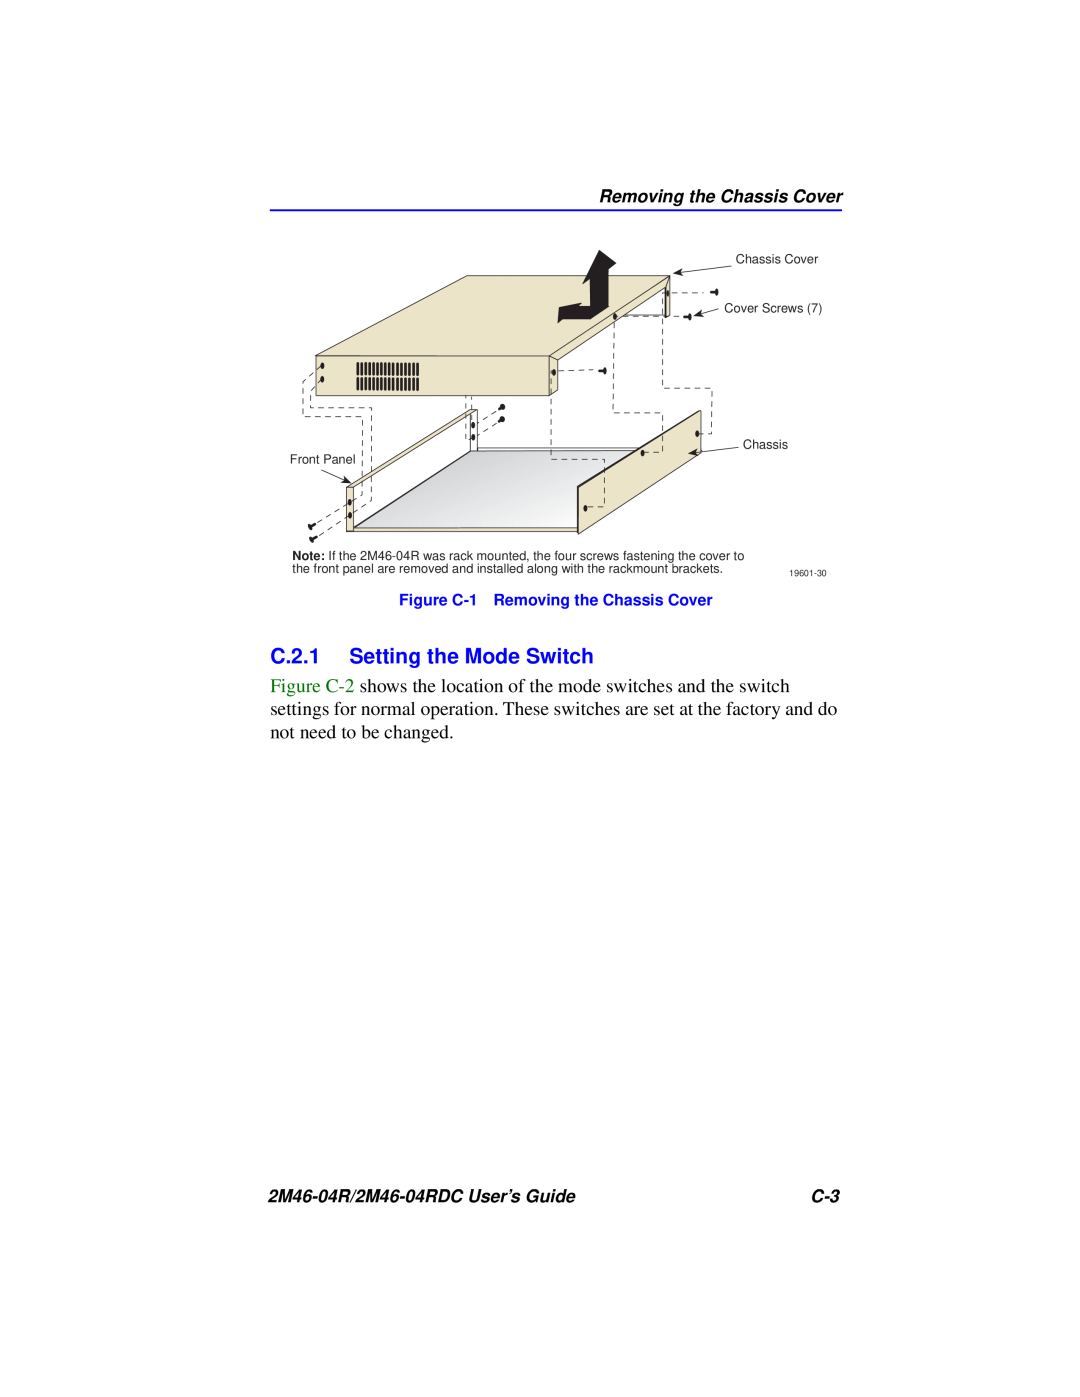 Cabletron Systems pmn manual C.2.1 Setting the Mode Switch, Removing the Chassis Cover, 2M46-04R/2M46-04RDC User’s Guide 